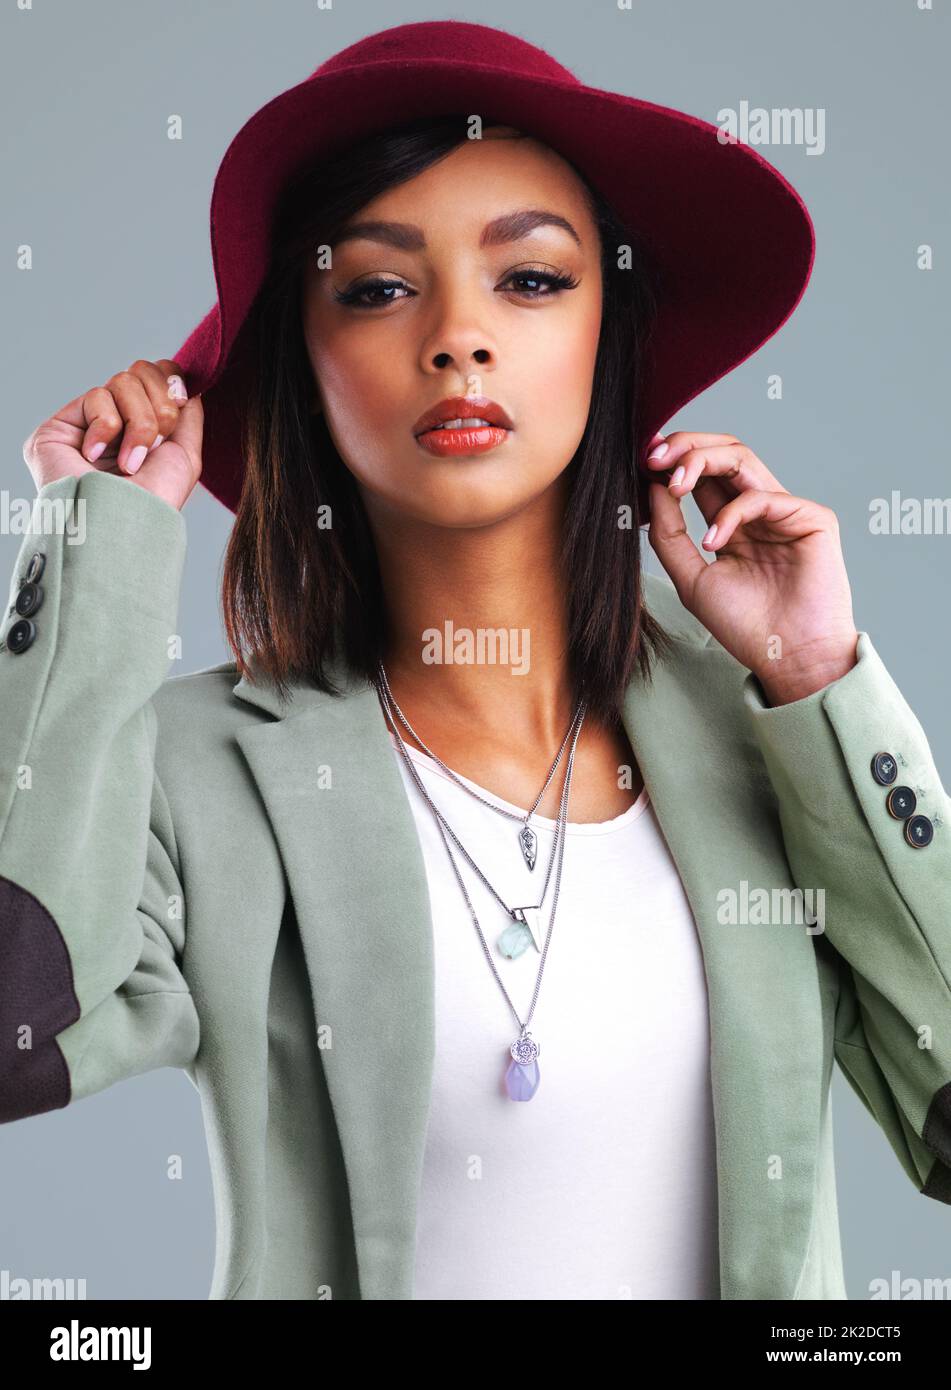 Fashions fade, style is eternal. Studio portrait of a stylish young woman posing against a gray background. Stock Photo